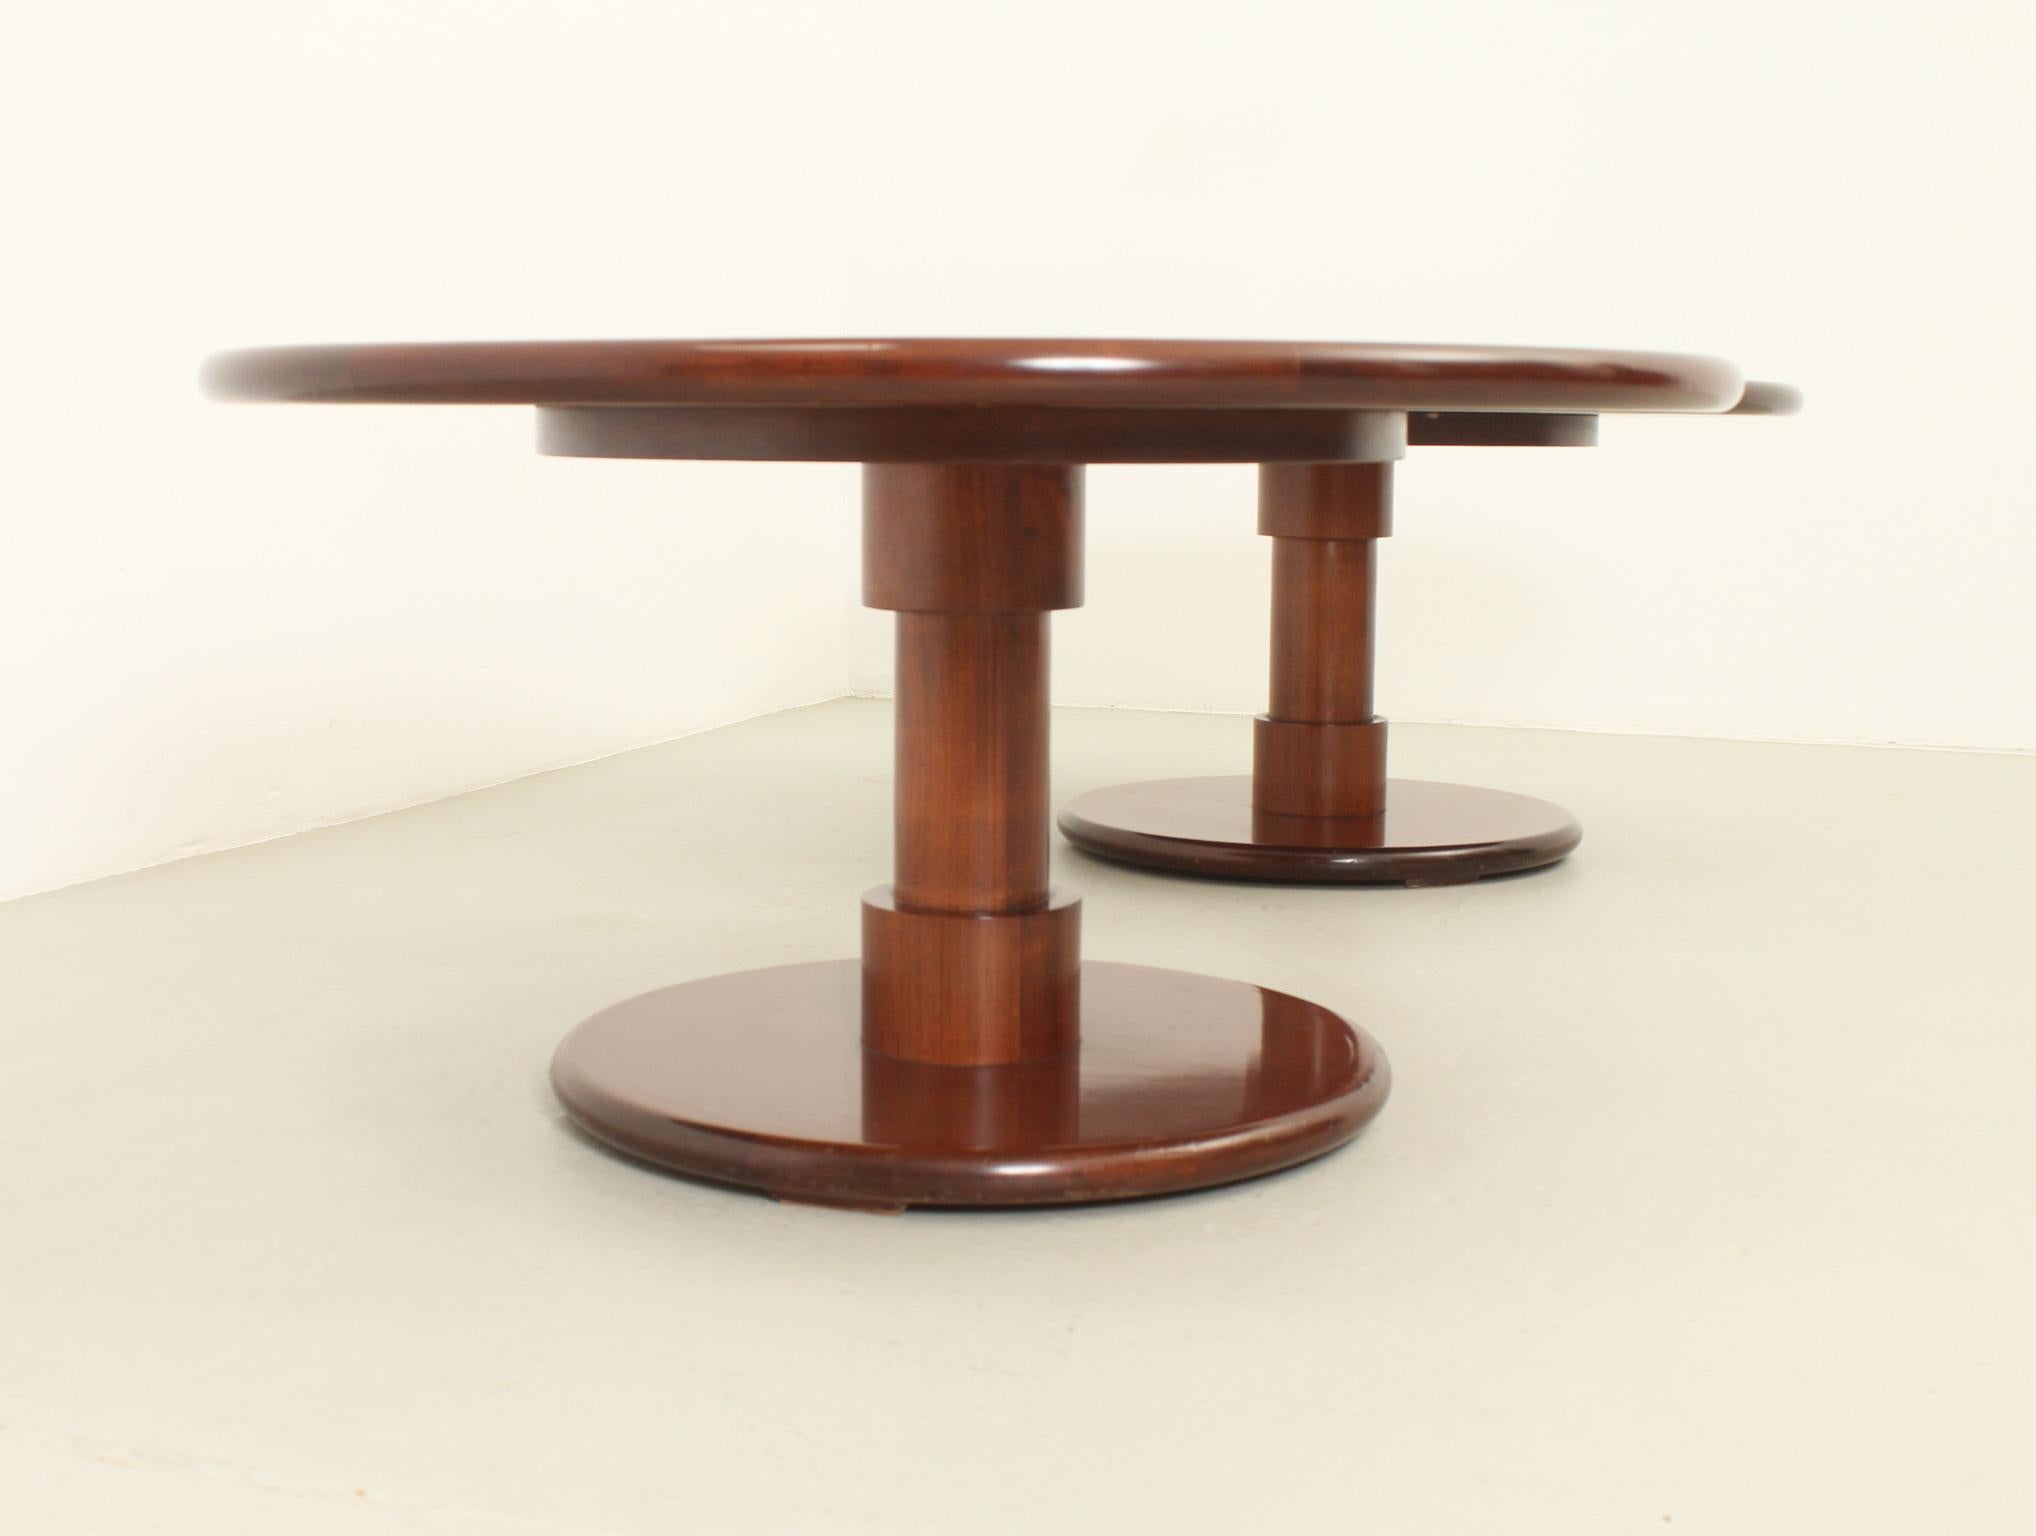 Pair of Coffee or Side Tables by Spanish Architects Correa & Milá, 1960's For Sale 1